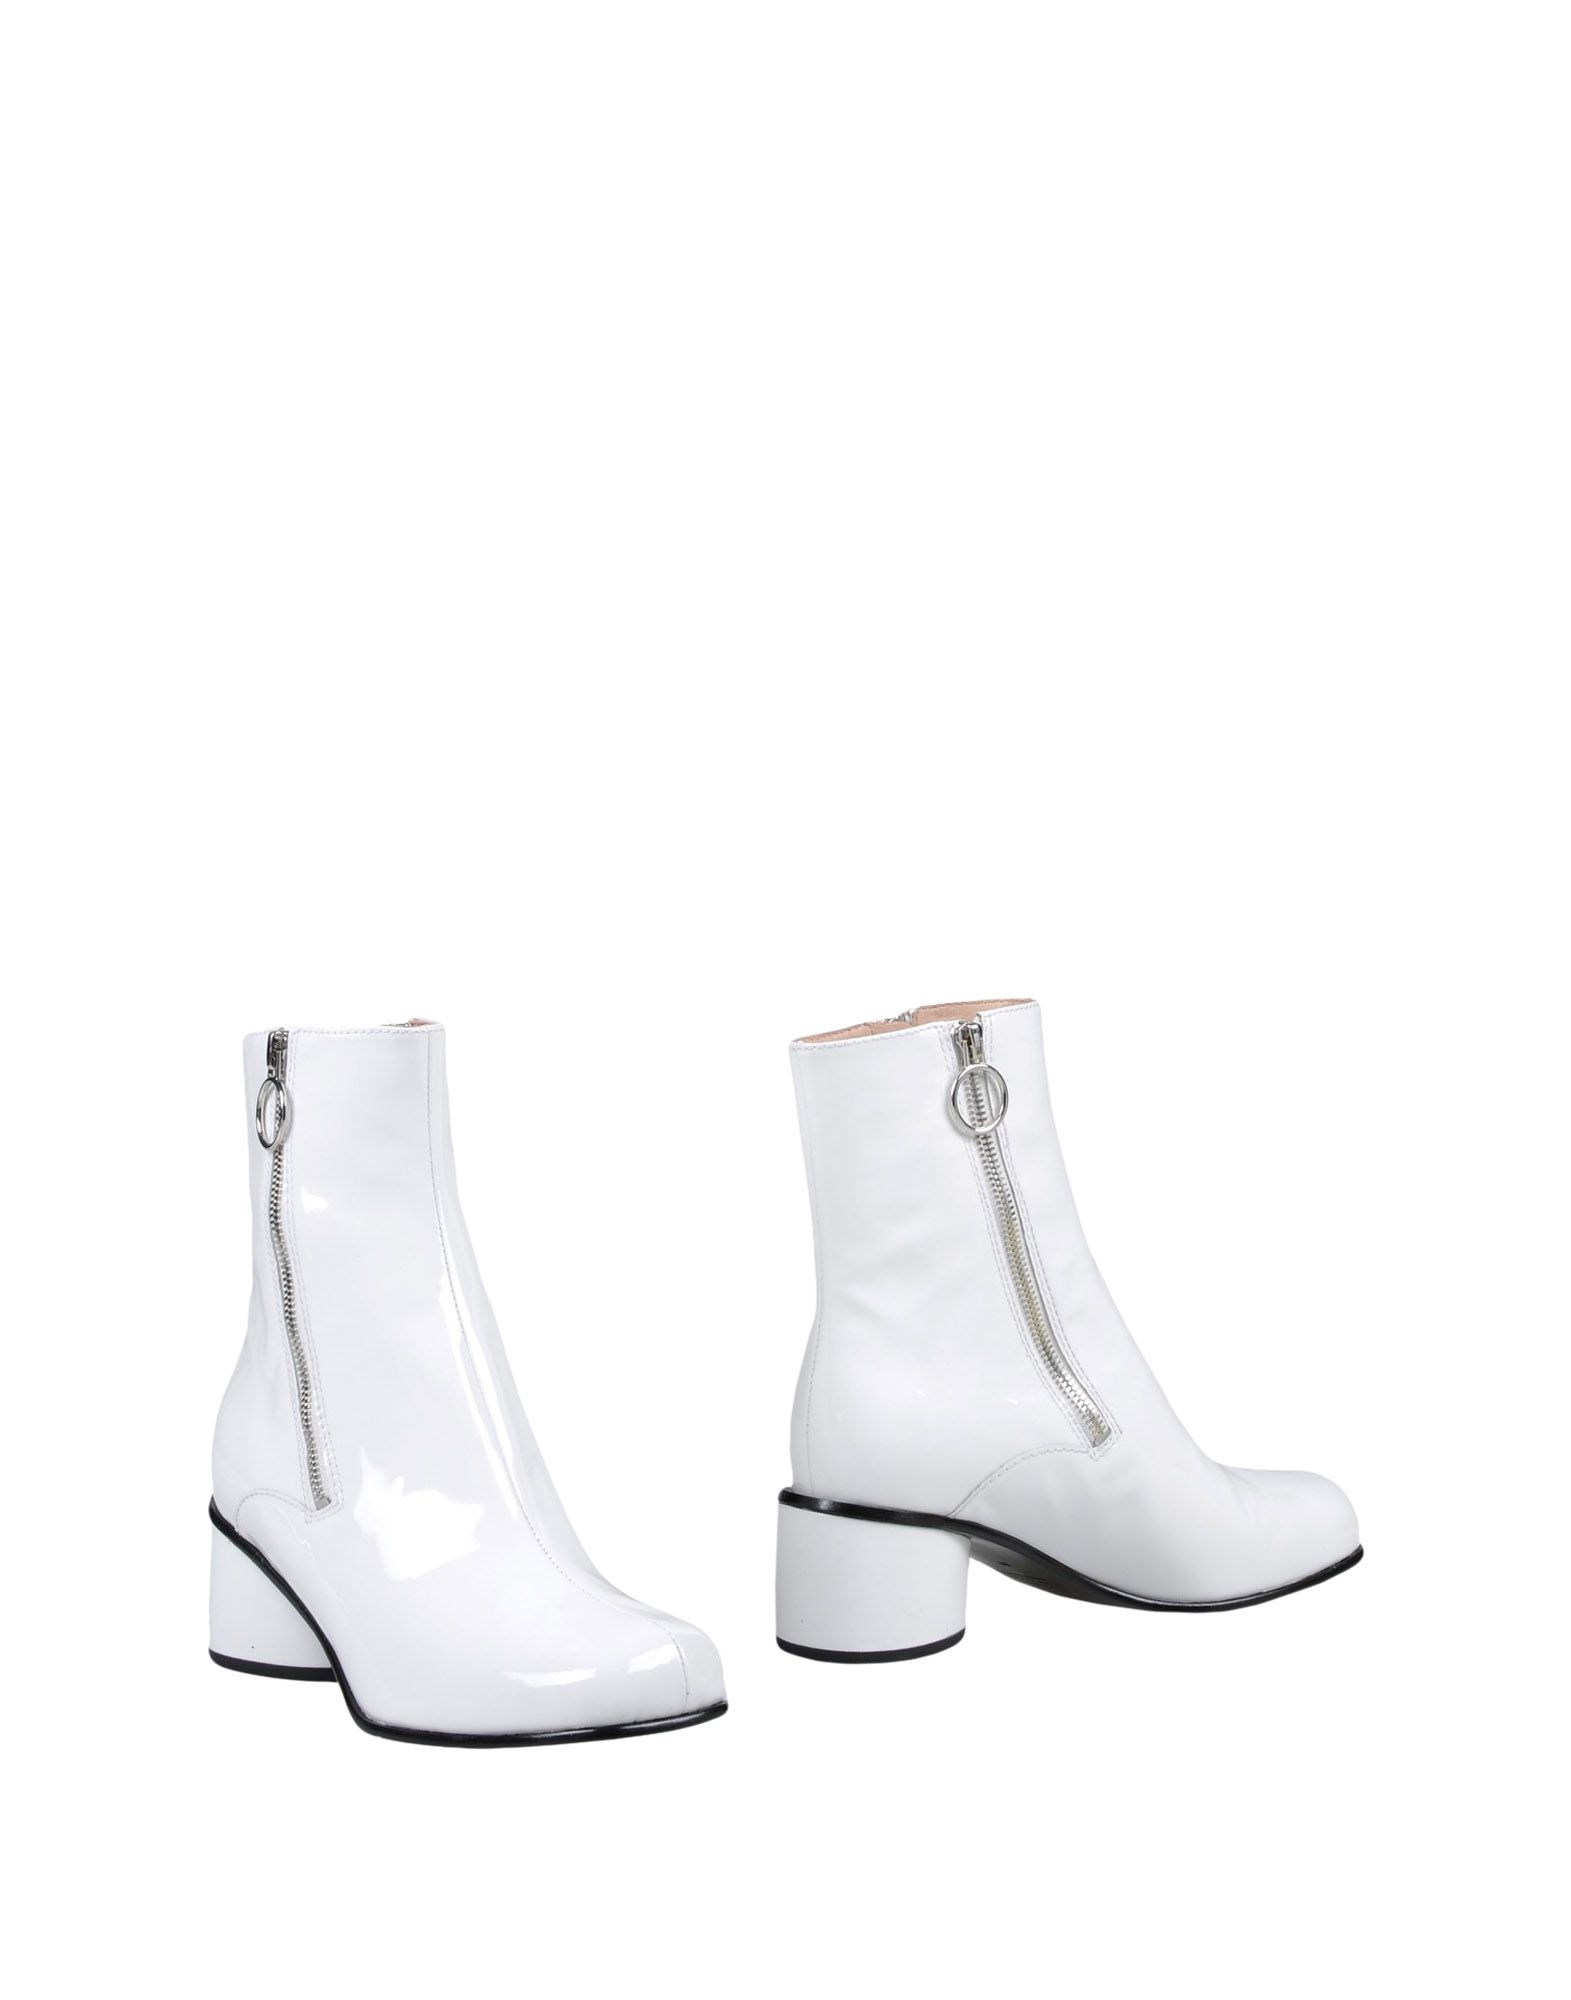 MARC JACOBS Ankle boot,11449050KV 5